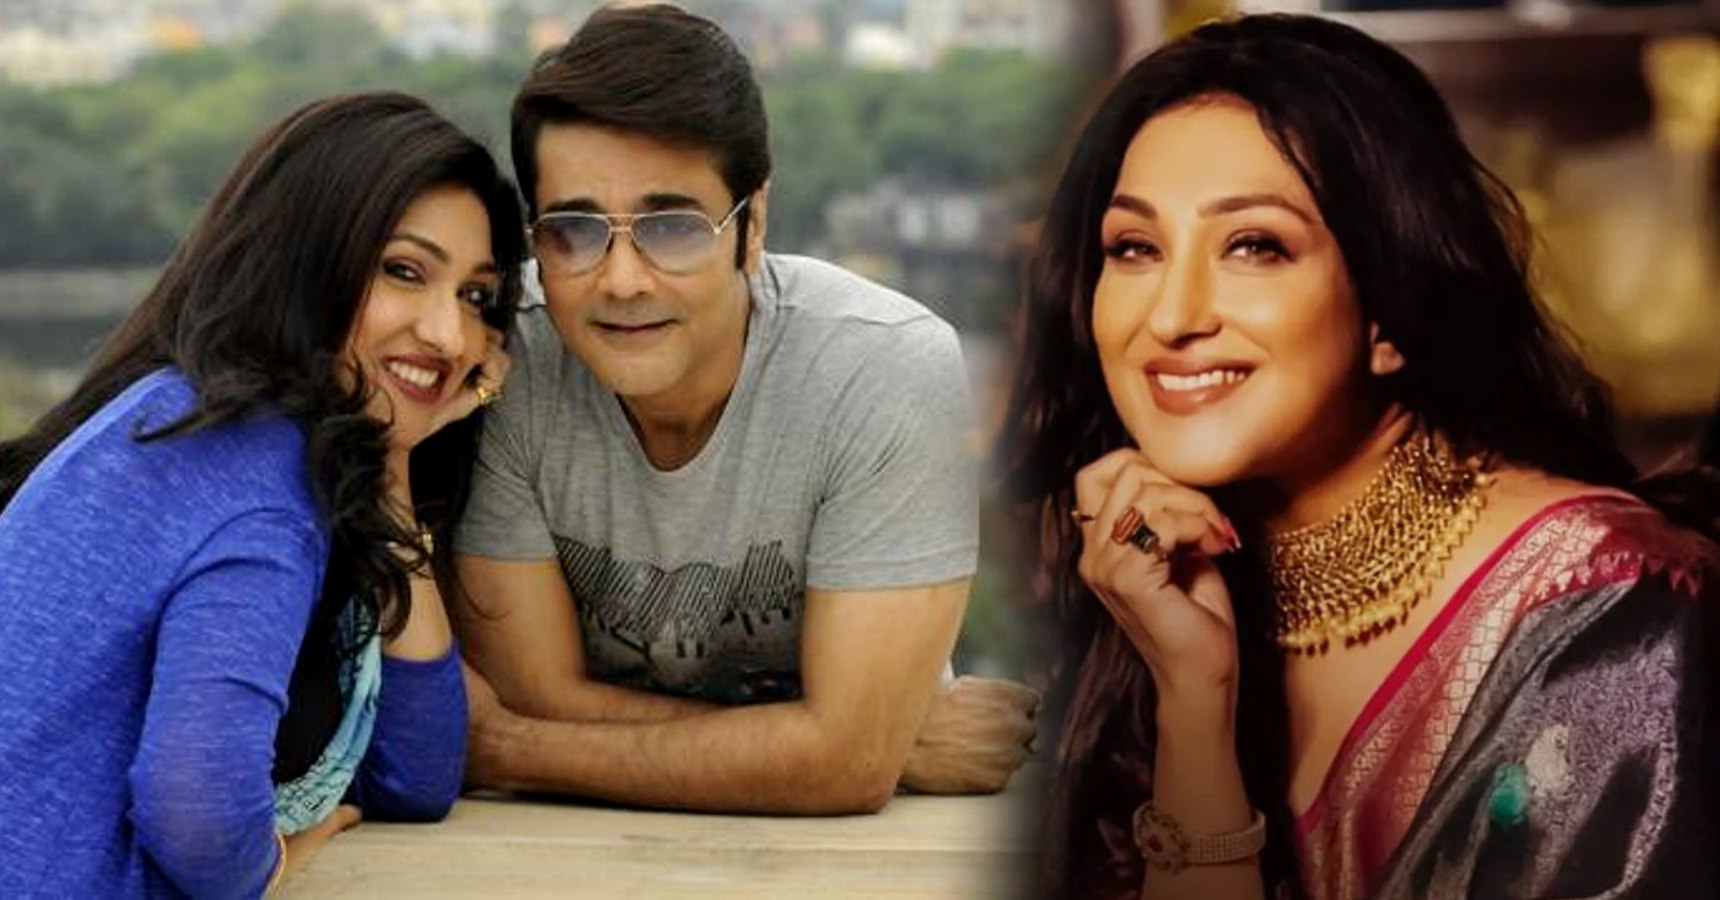 Rituparna Sengupta once opened up about rumours of love relation with Prosenjit Chatterjee